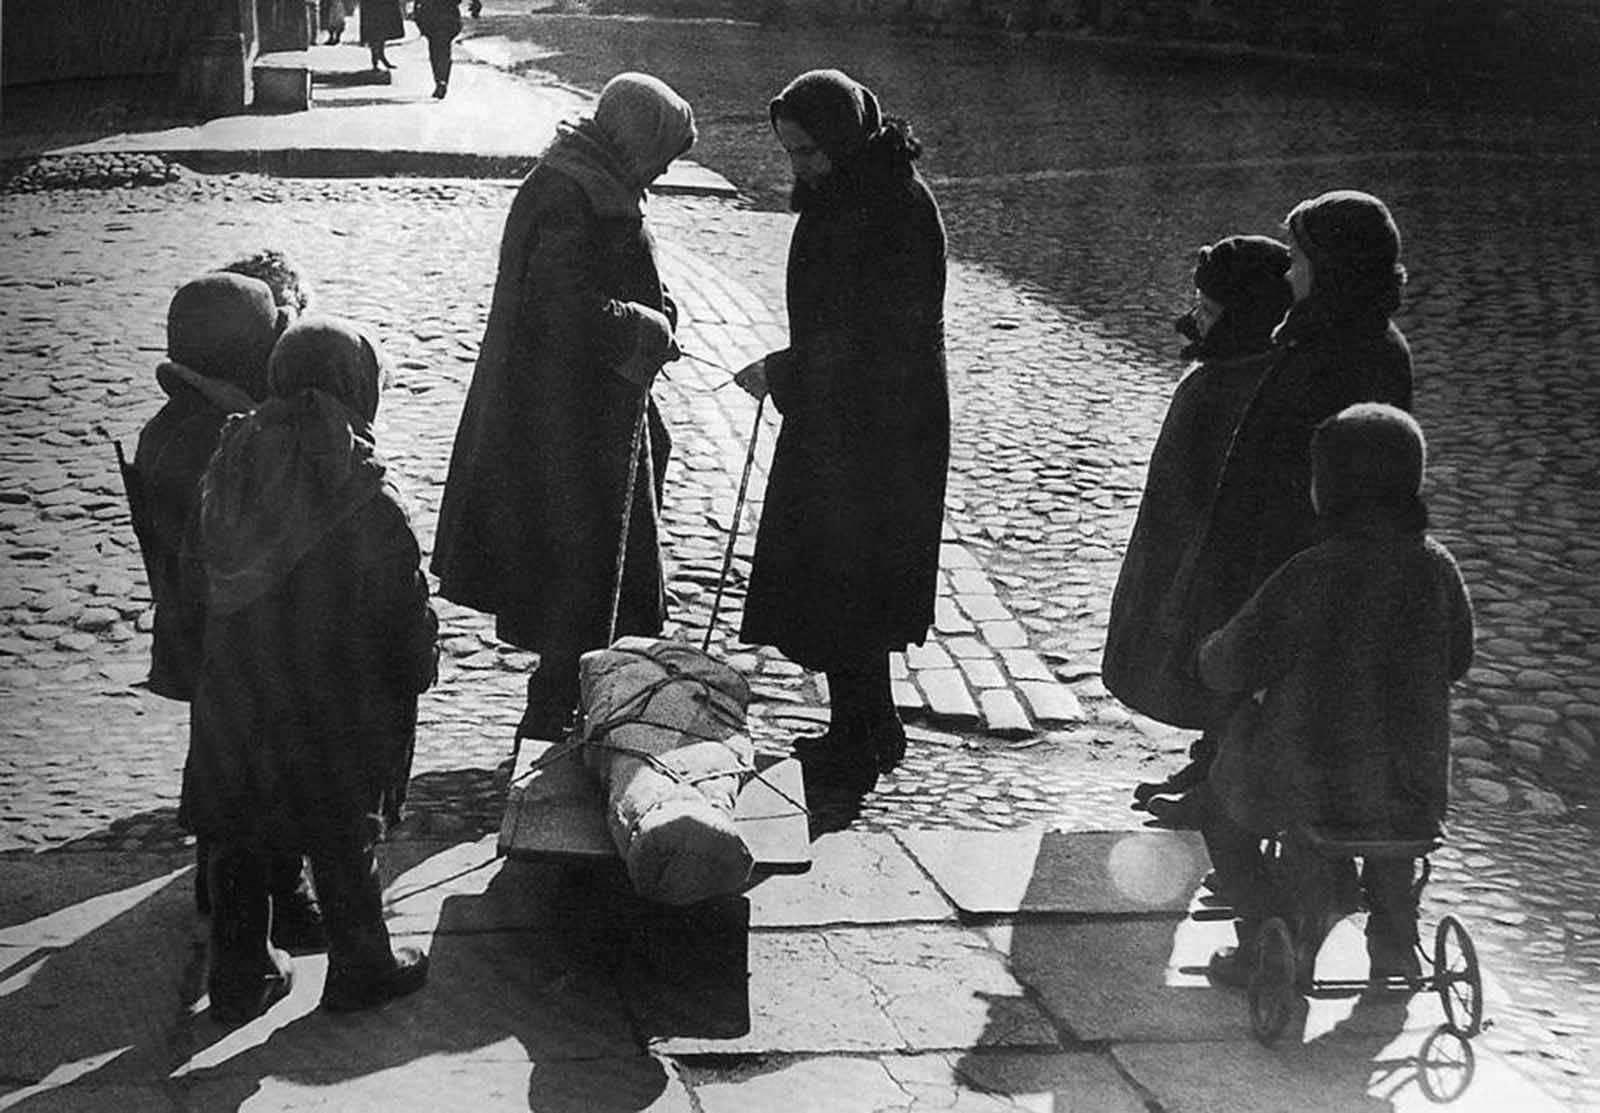 A farewell in Leningrad, in the spring of 1942. The German Siege of Leningrad caused widespread starvation among citizens, and lack of medical supplies and facilities made illnesses and injuries far more deadly. Some 1.5 million soldiers and civilians died in Leningrad during the siege - nearly the same number were evacuated, and many of them did not survive the trip due to starvation, illness, or bombing. 